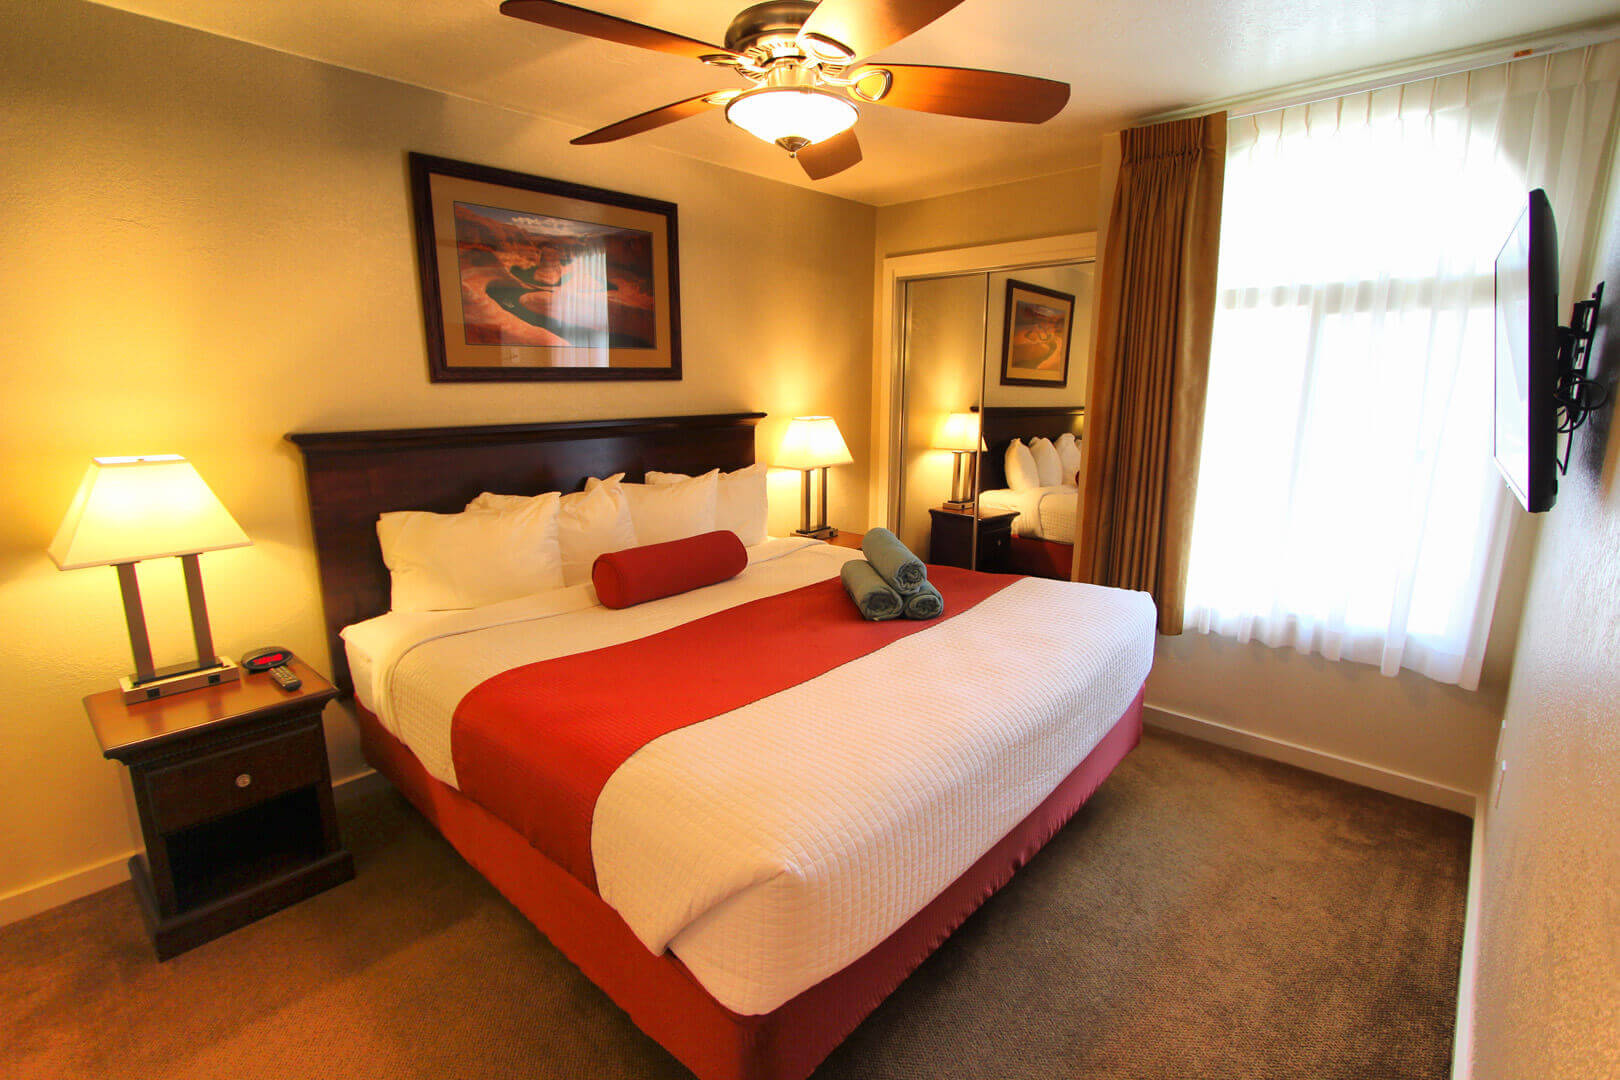 A colorful and renovated master bedroom at VRI's Villas at South Gate in St George, Utah.